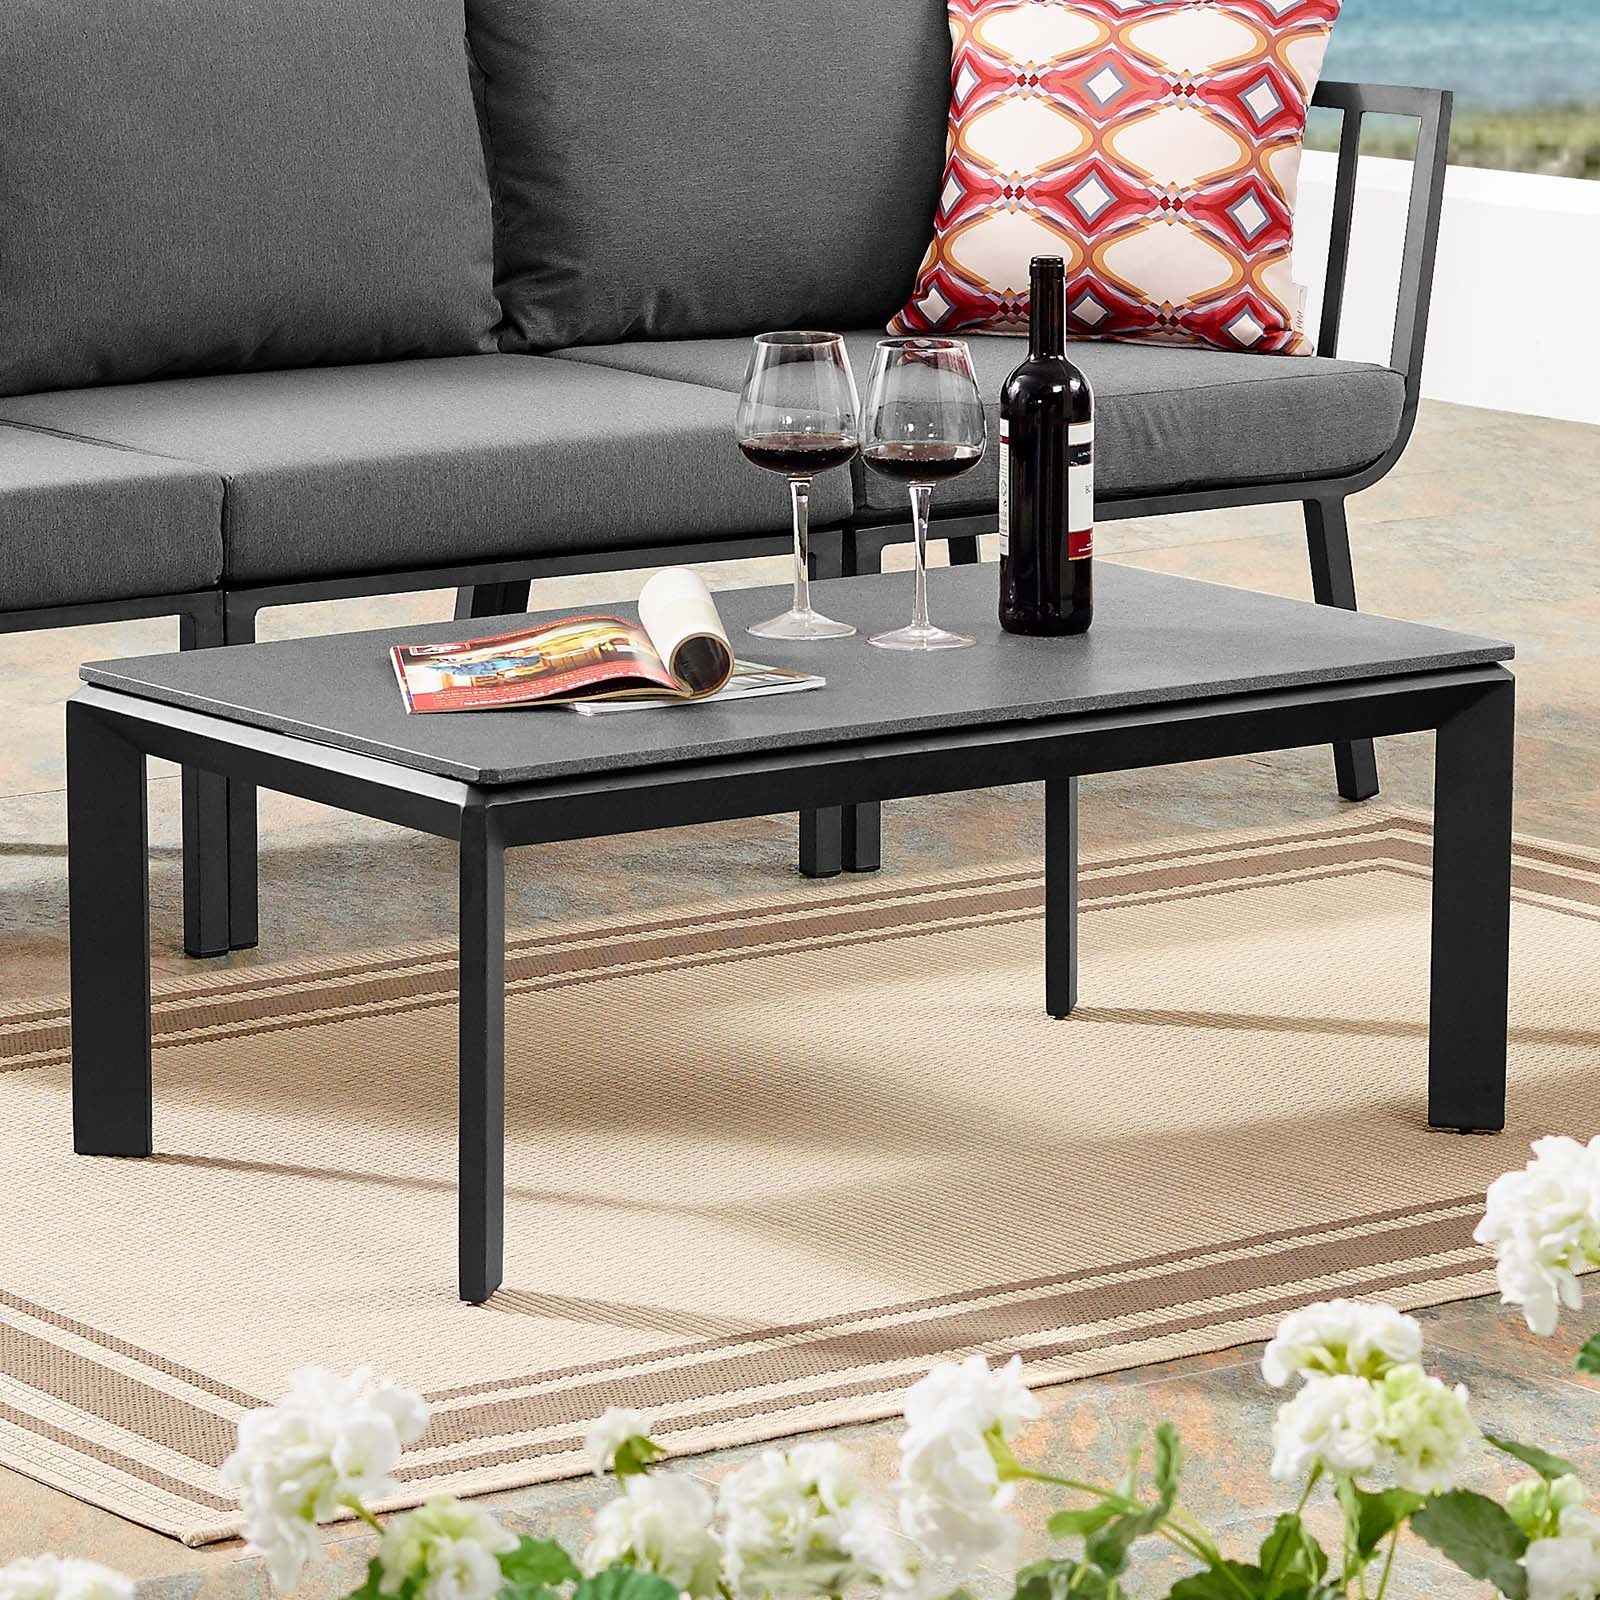 Modway Outdoor Coffee Tables - Riverside Rectangular Coffee Table Gray